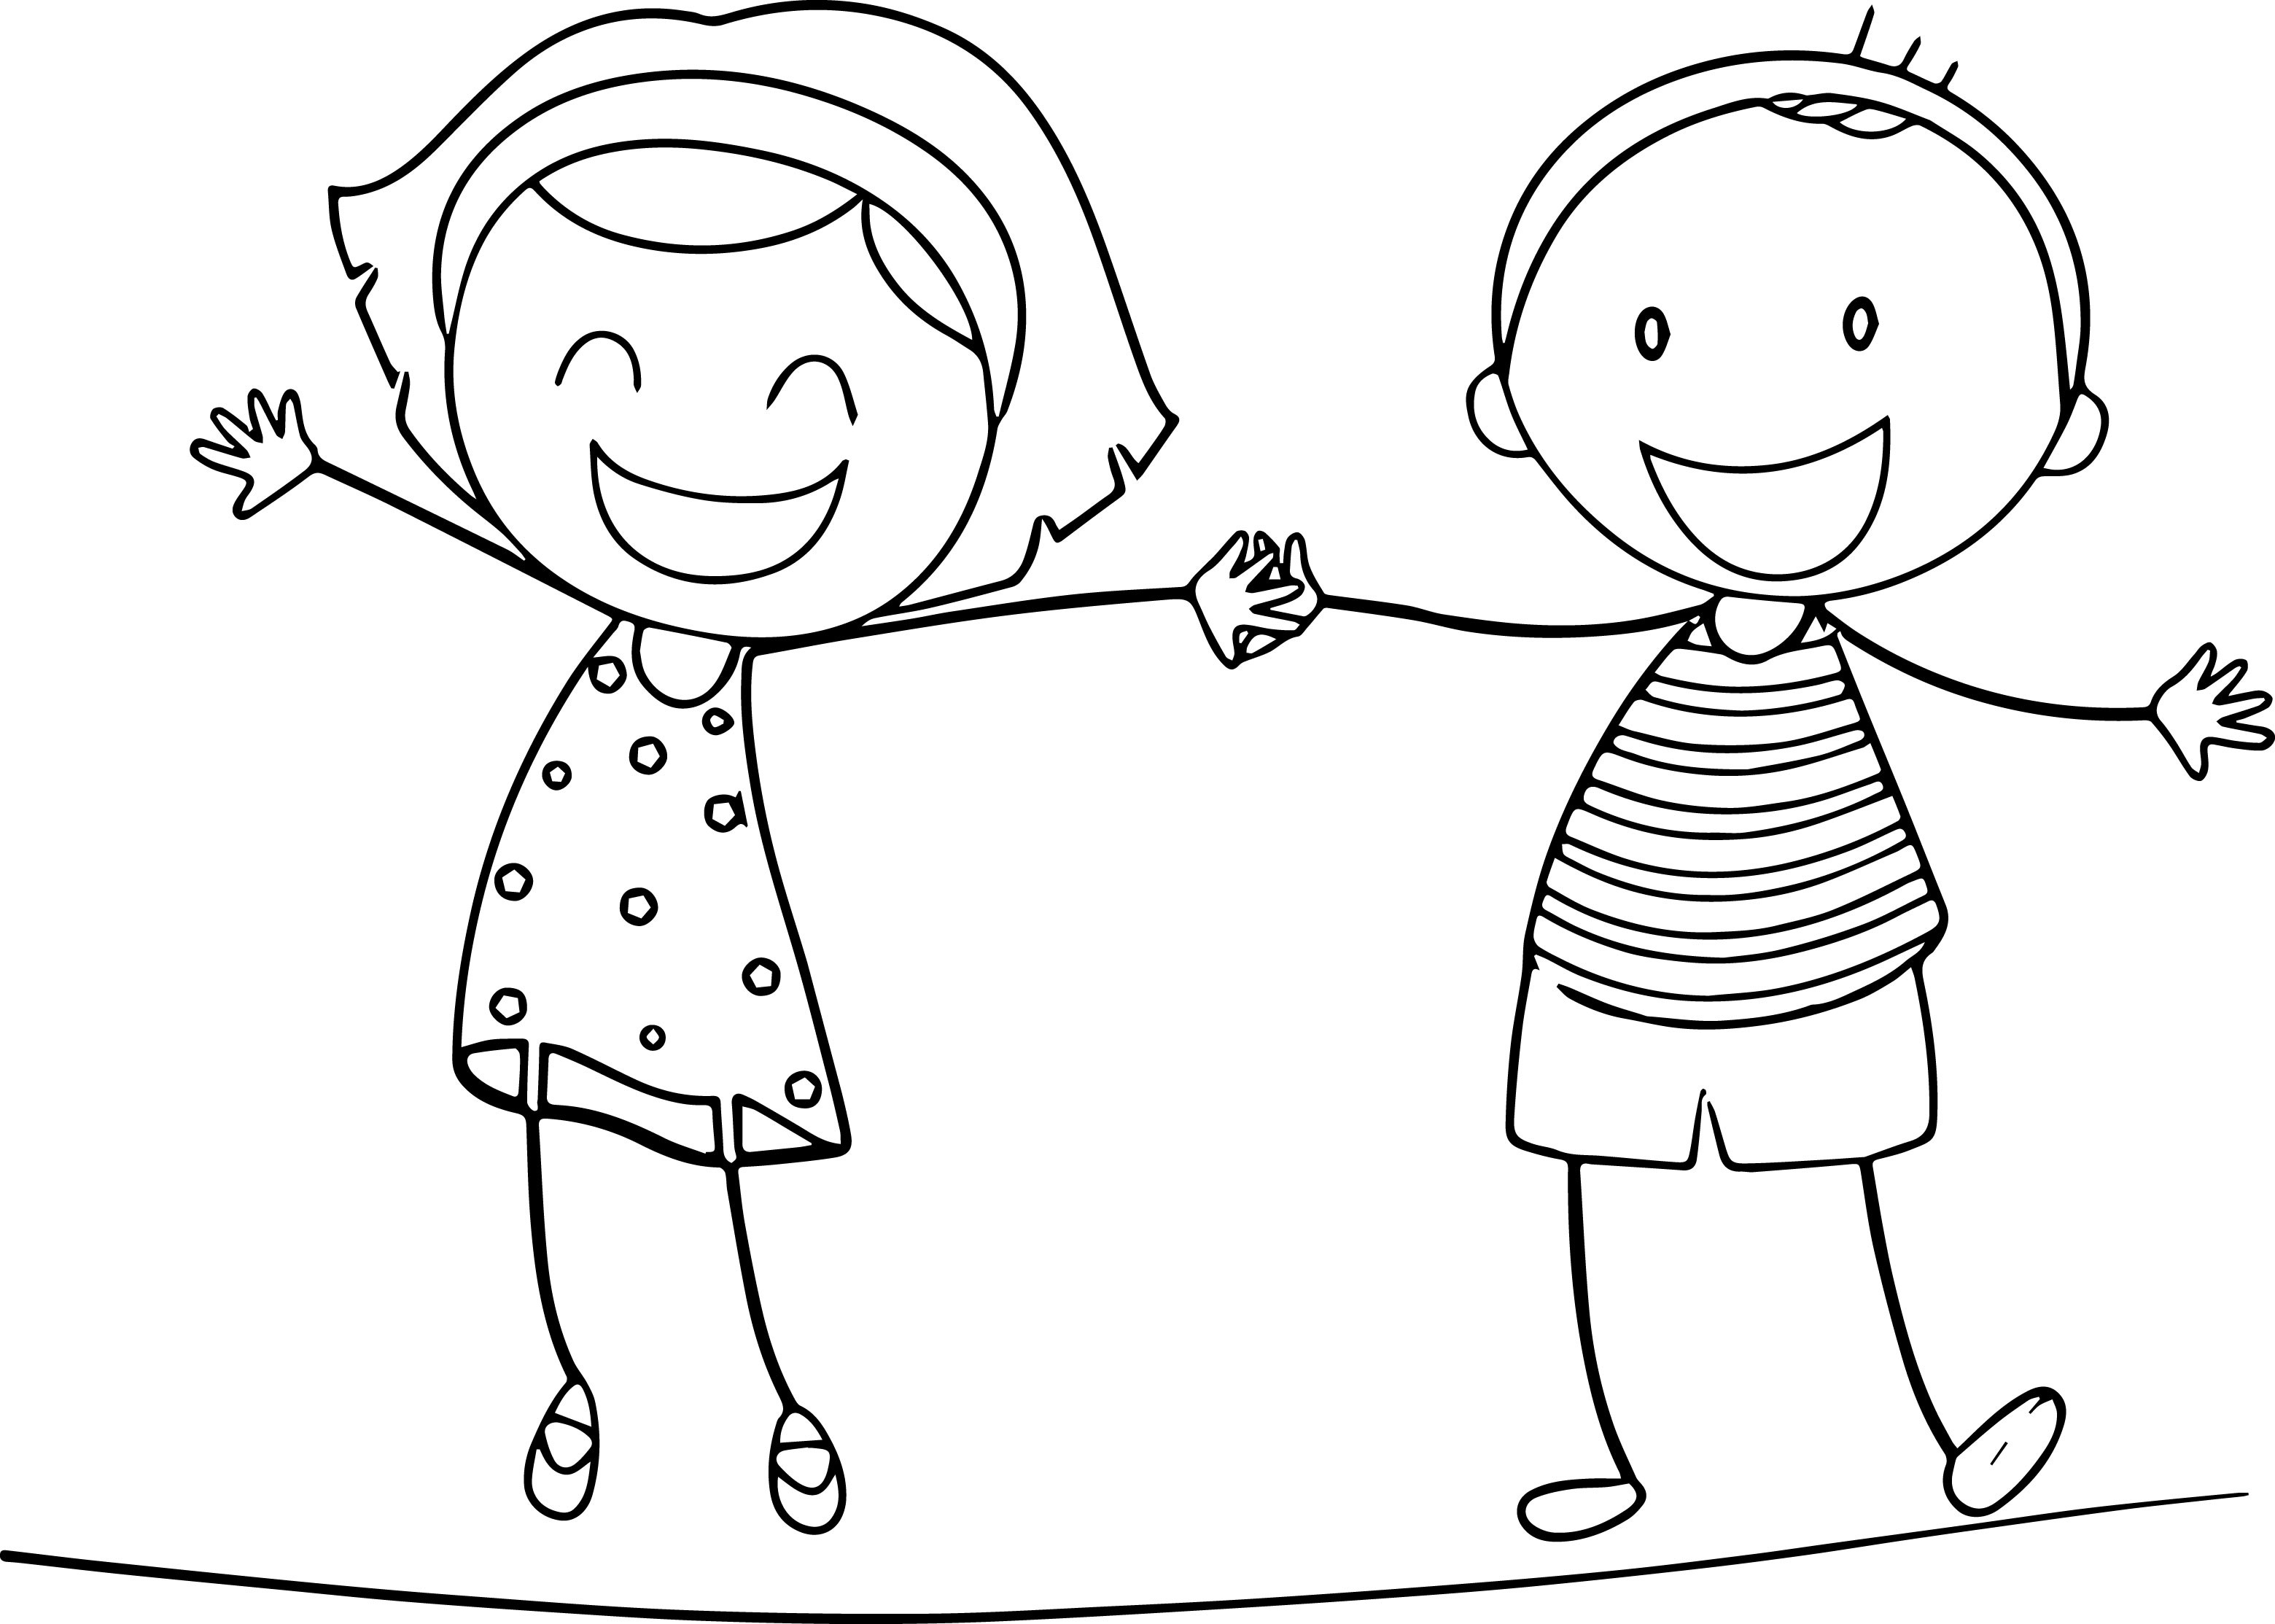 Coloring Pages For Boys Designed
 Girl And Boy Coloring Pages Girl And Boy Coloring Pages